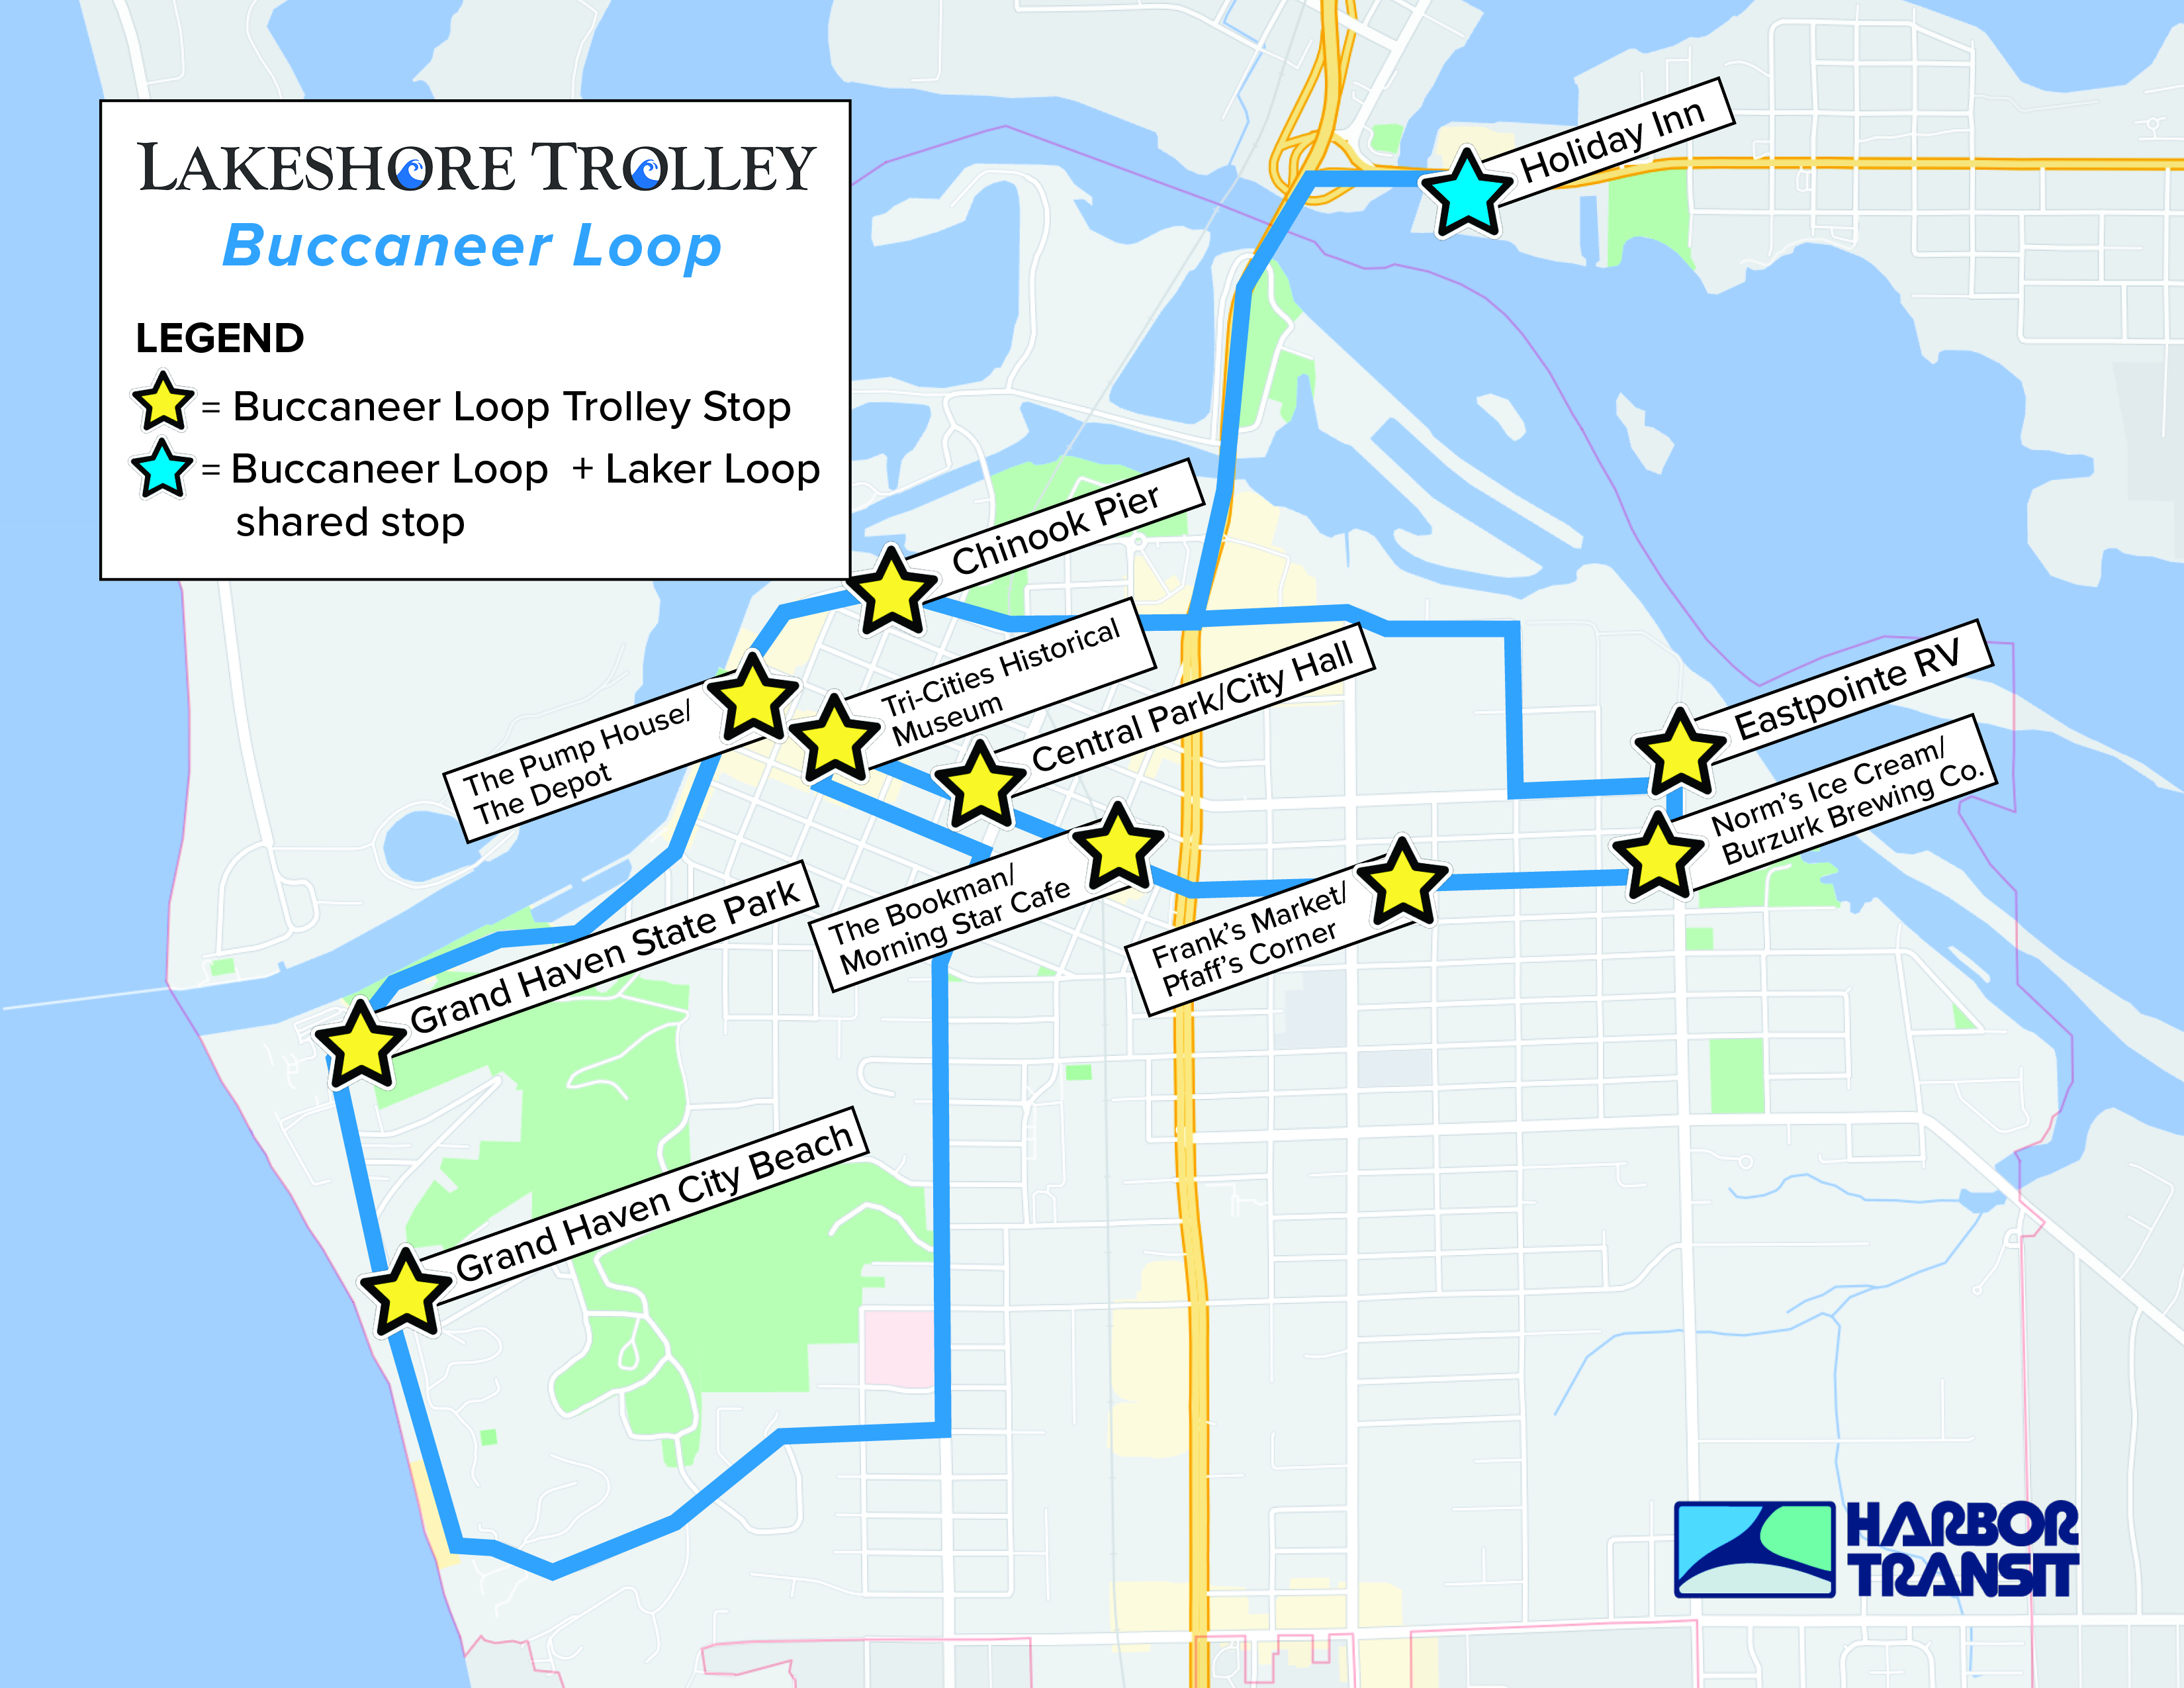 Harbor Transit will run a free 45-minute loop through Grand Haven this summer using its new blue Lakeshore Trolley.